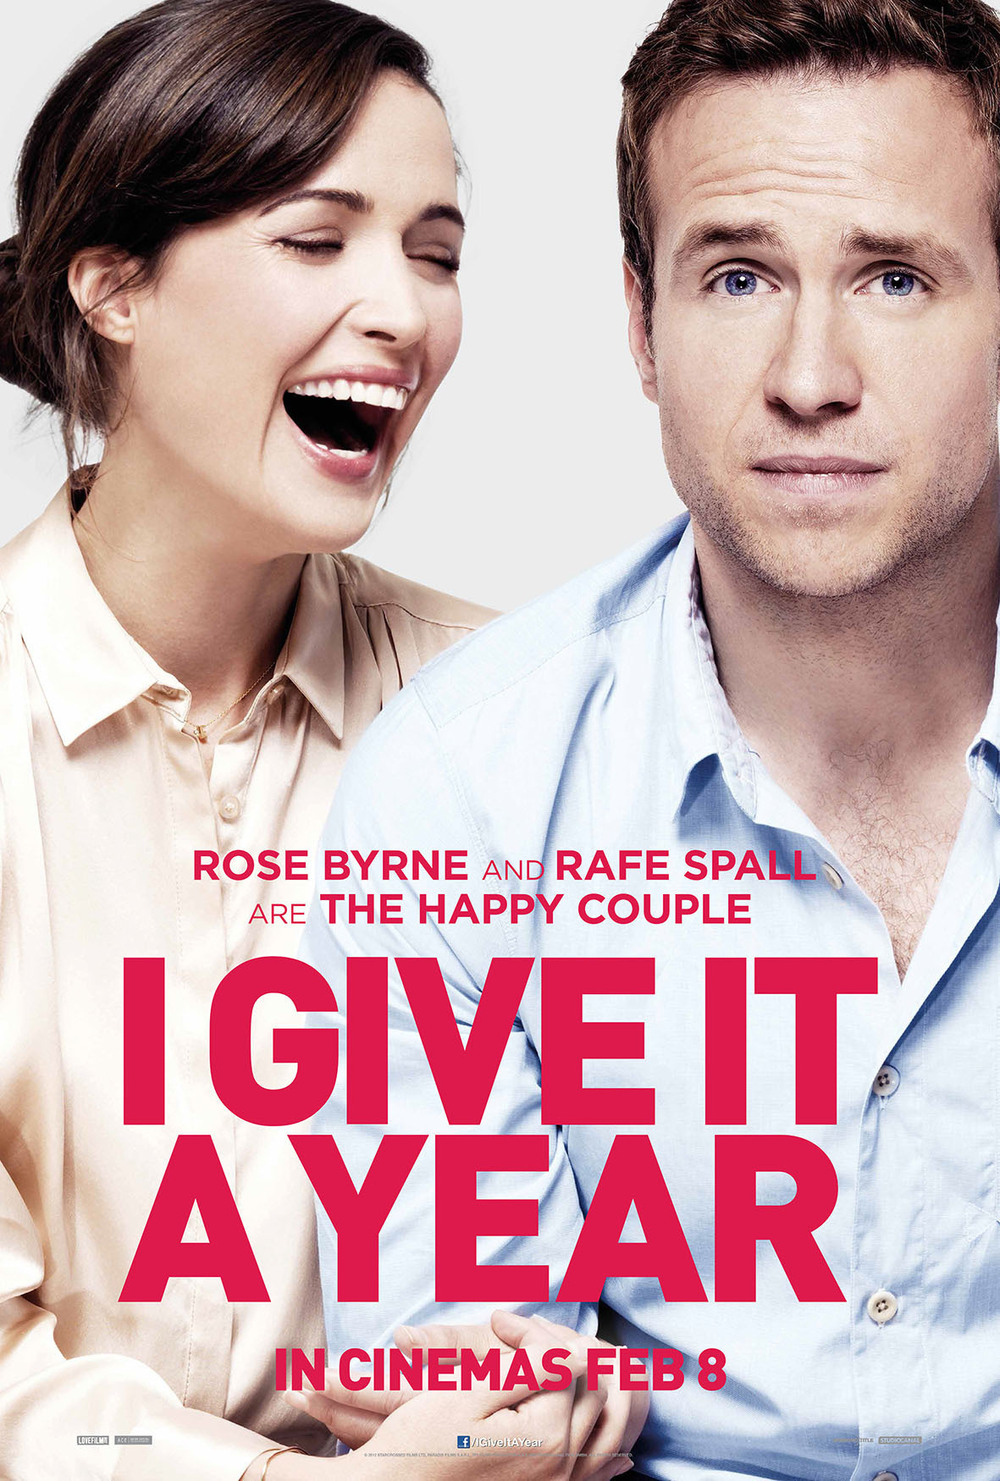 i give it a year movie review